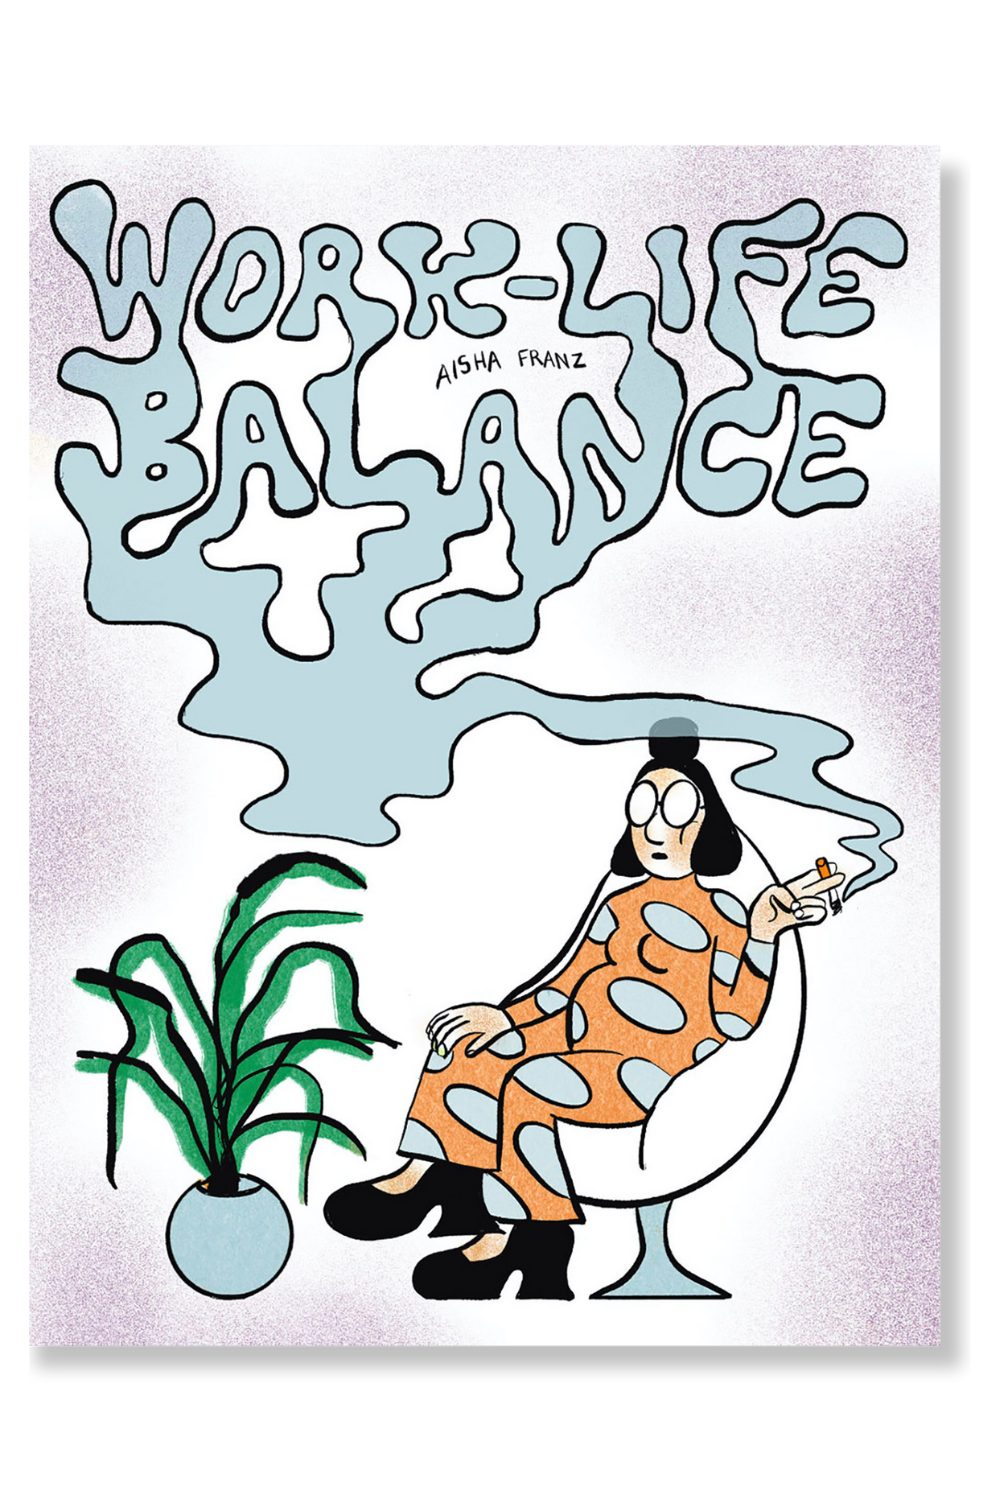 The cover of "Work-Life Balance"